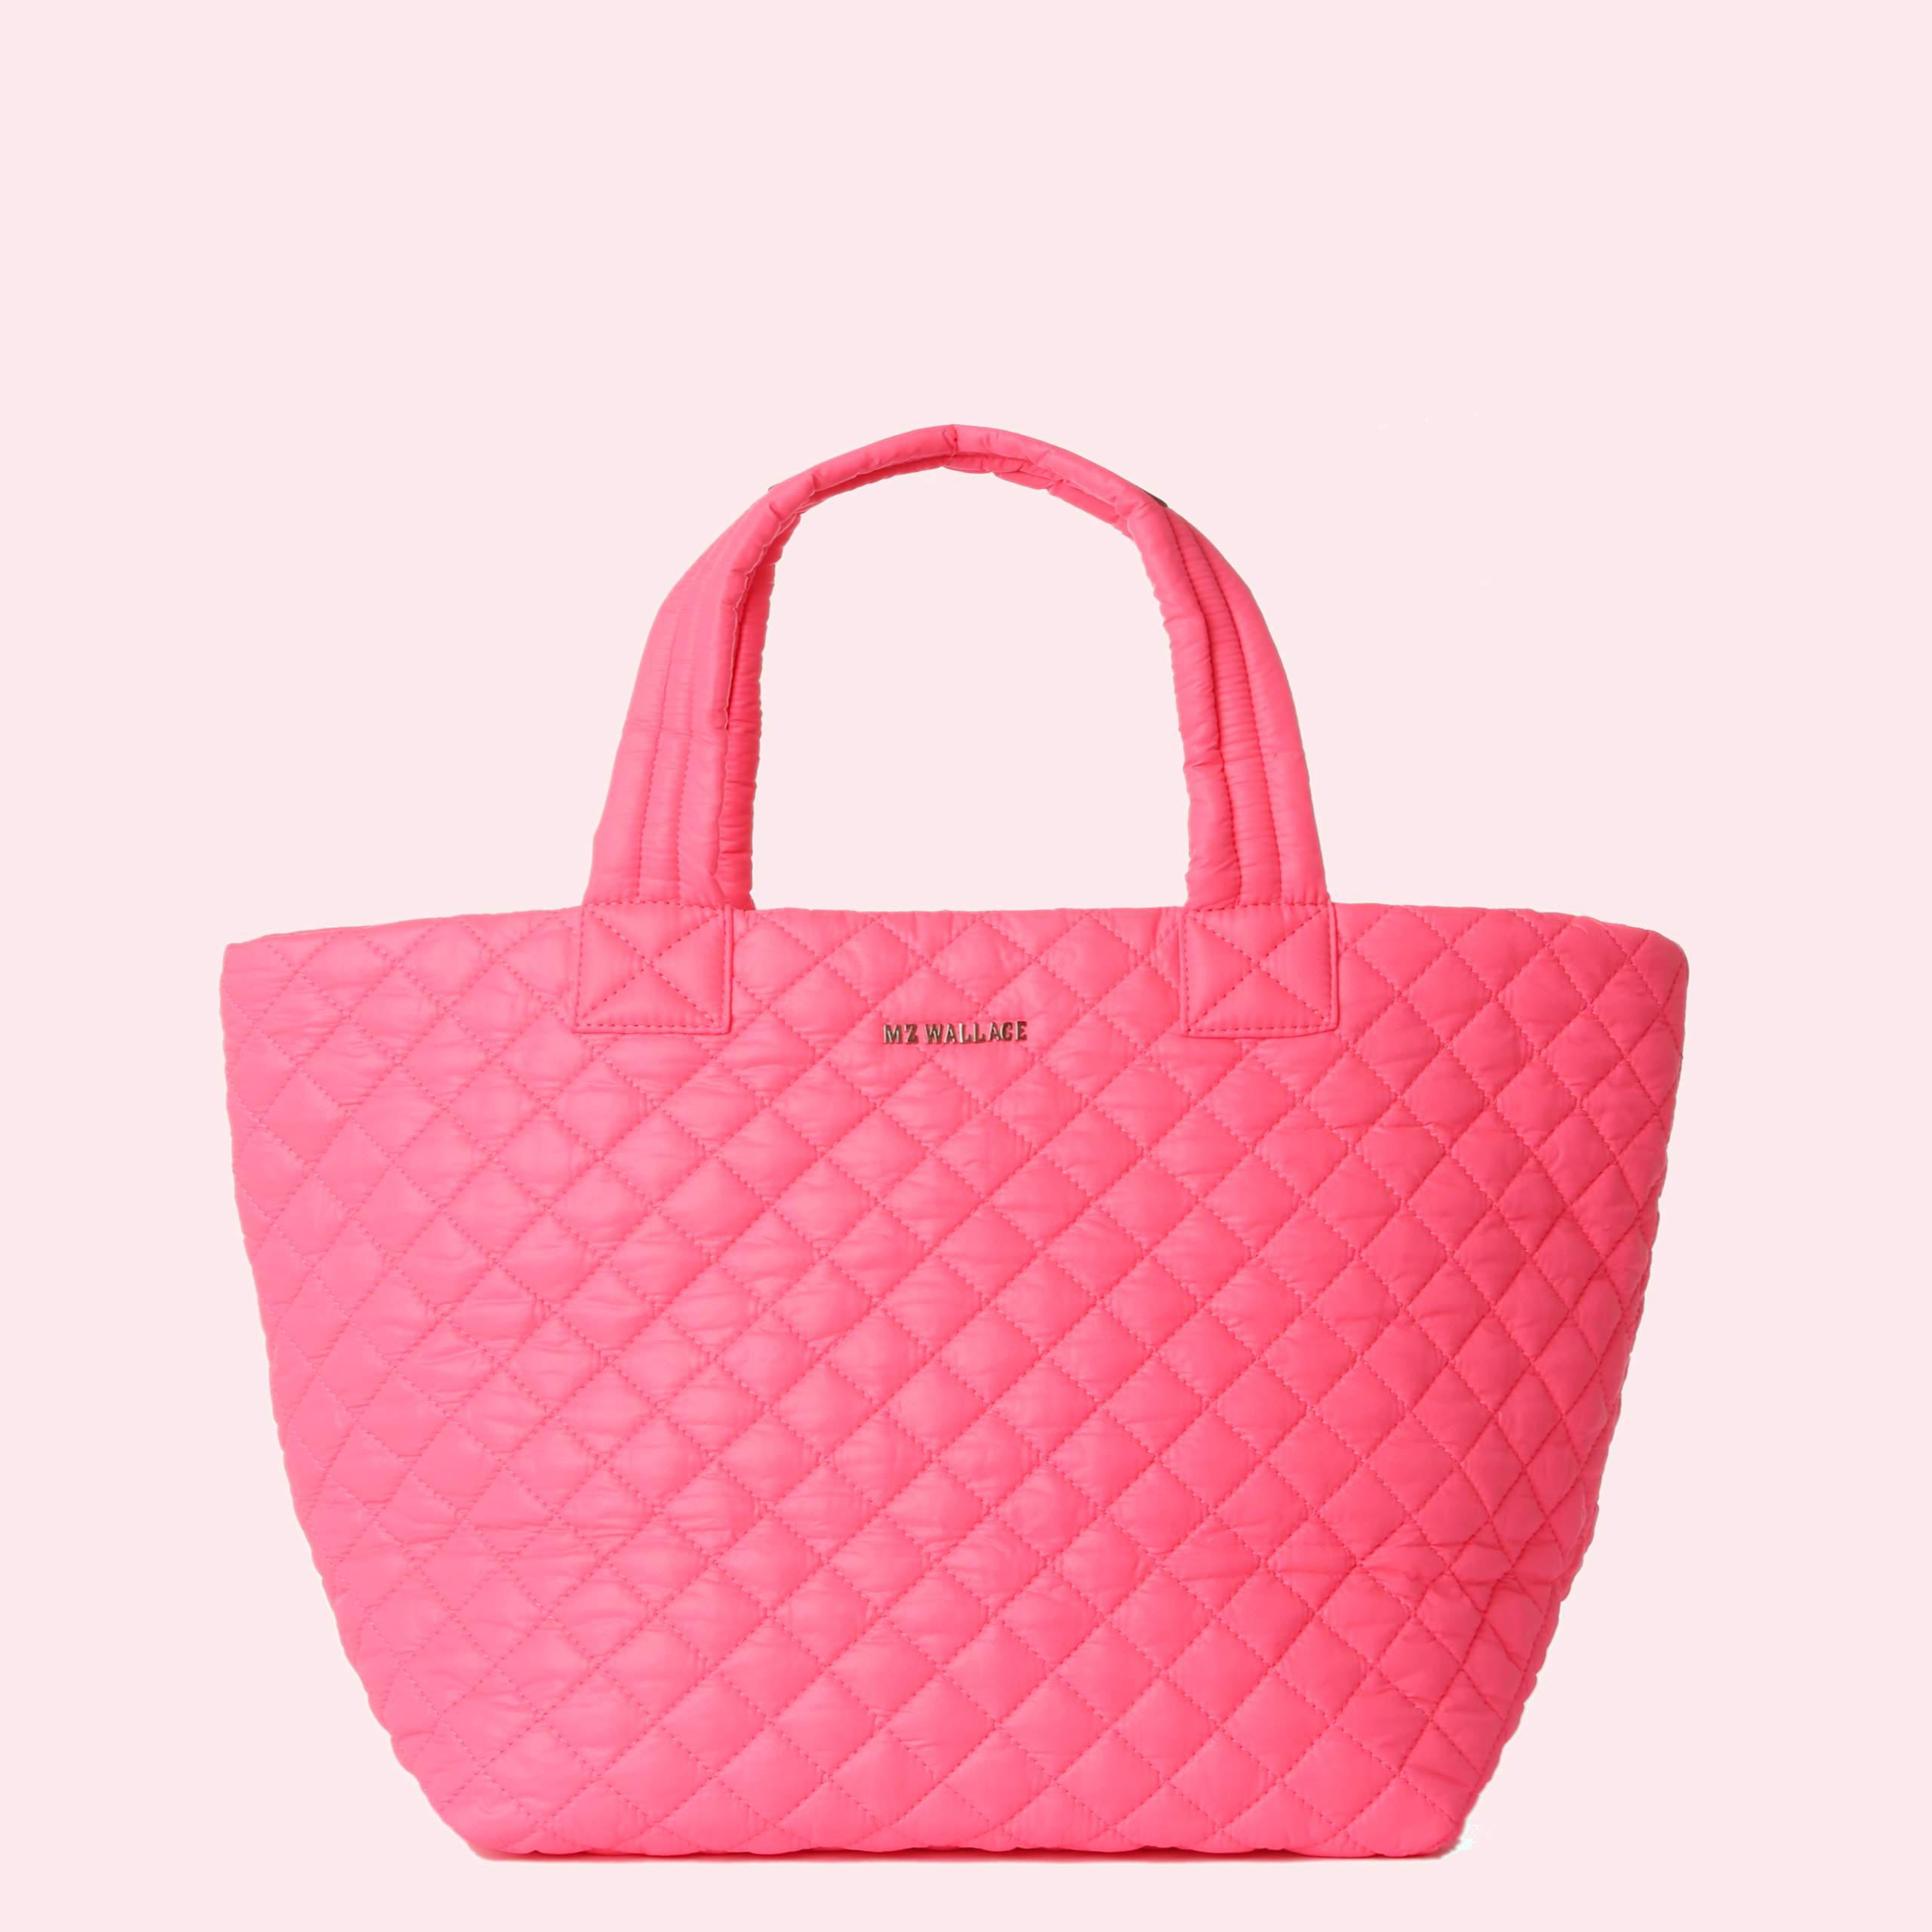 Mz wallace Small Metro Tote Neon Pink in Pink | Lyst